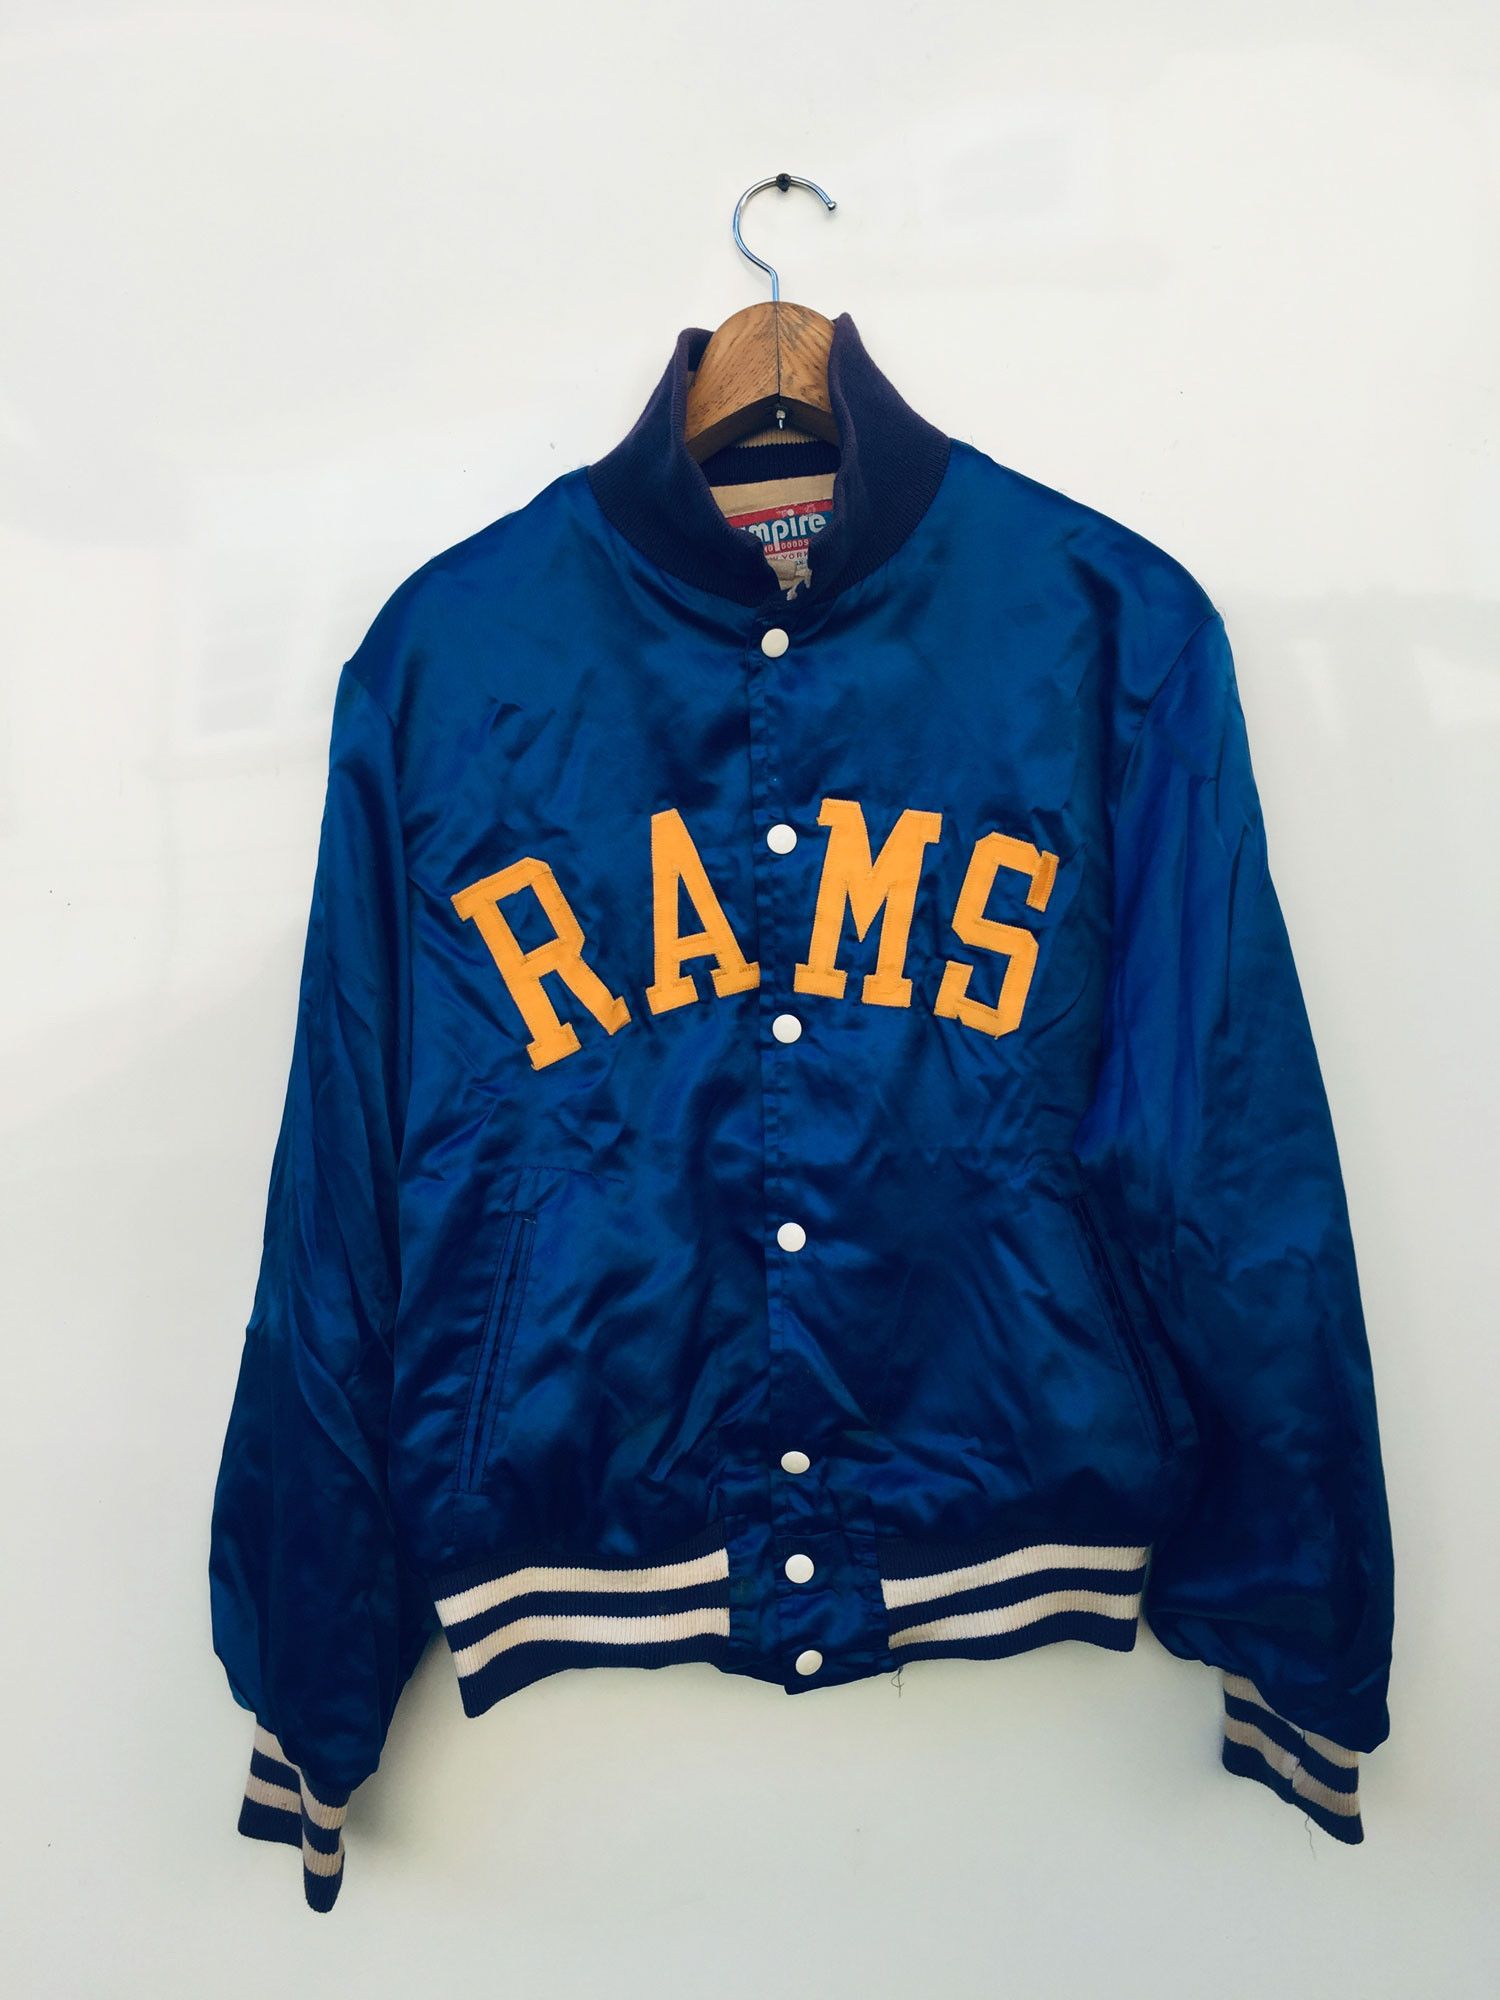 Vintage Rams Satin College NFL Los Angeles Empire Sporting Goods Size US L / EU 52-54 / 3 - 1 Preview